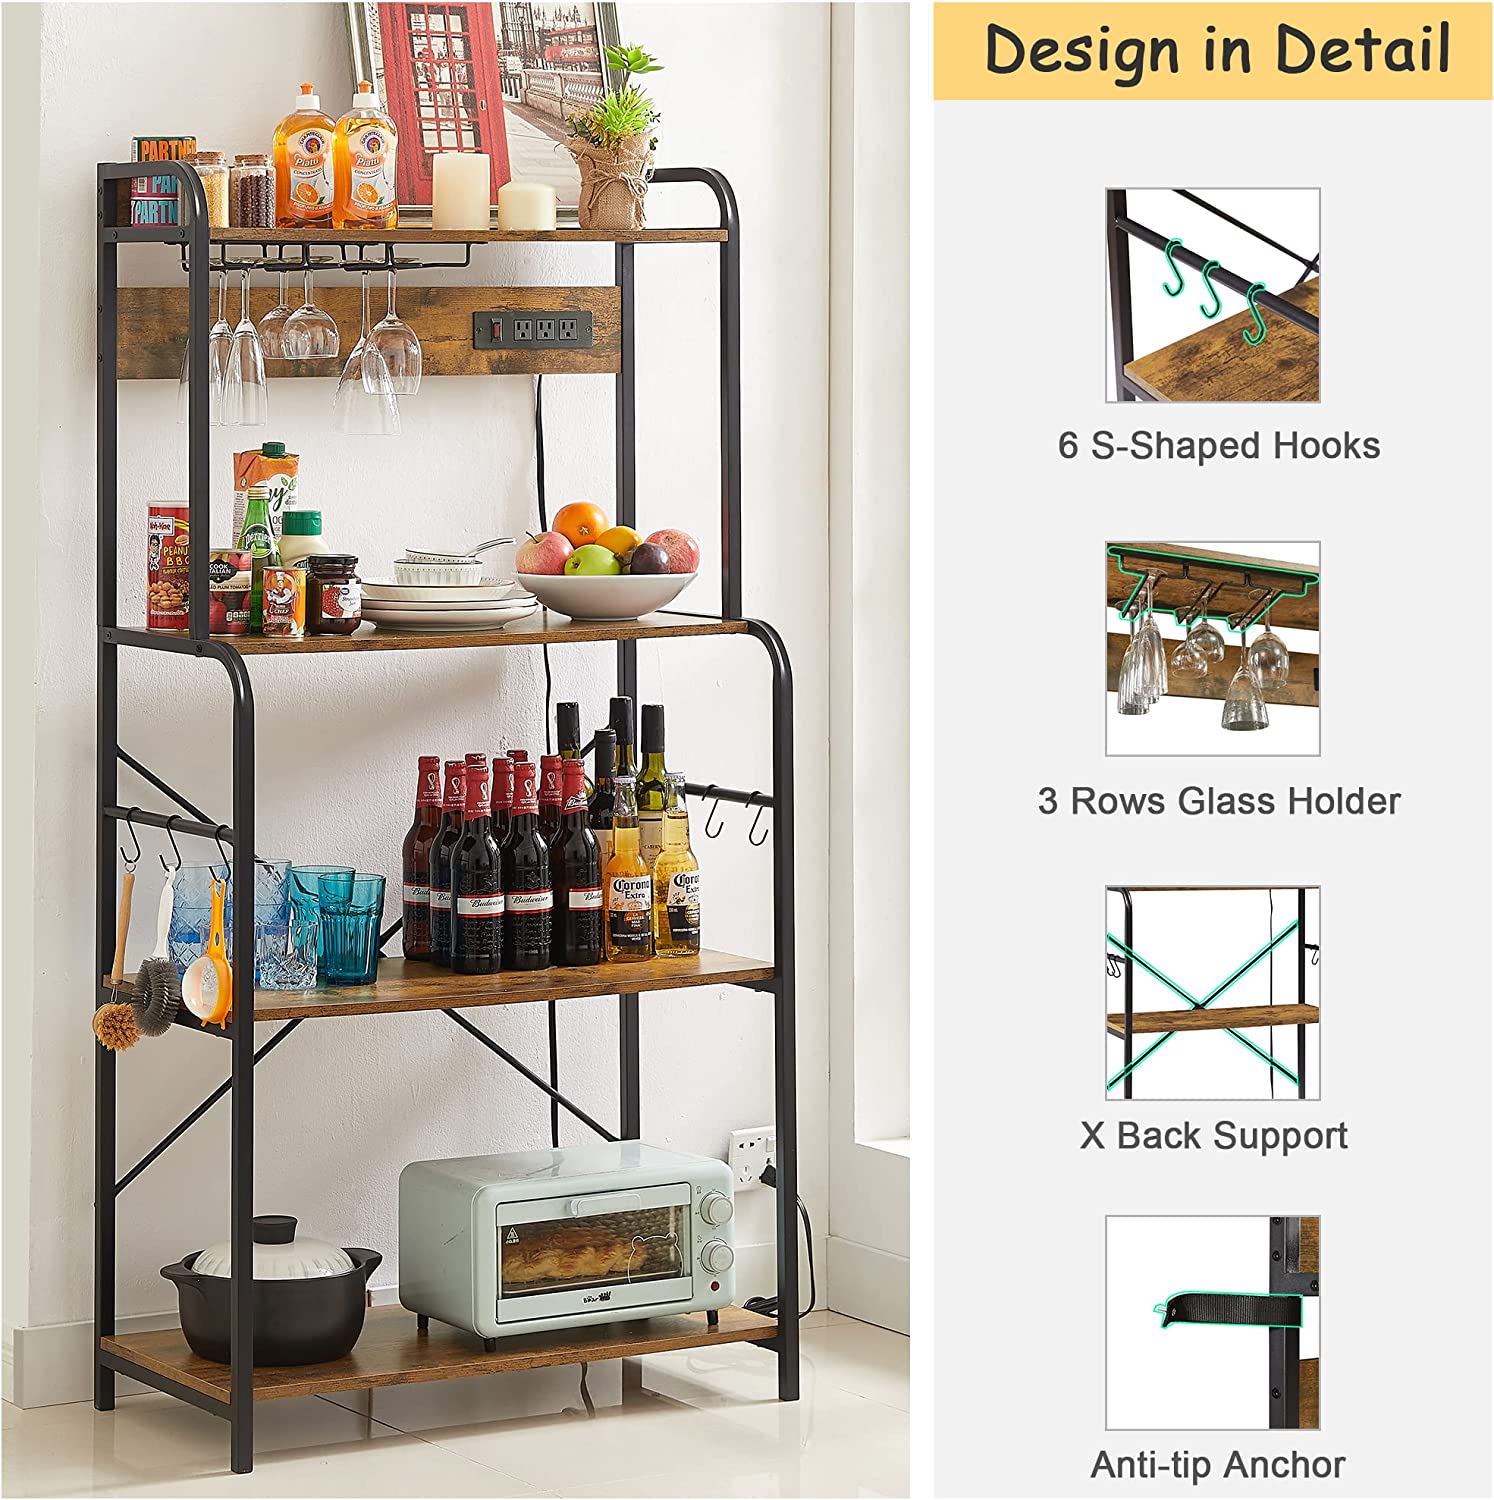 VECELO Baker's Rack with Power Outlet, Kitchen Utility Storage with 4-tier shelves, Hooks and Glass Holder for Dining Room/Kitchen Organizer